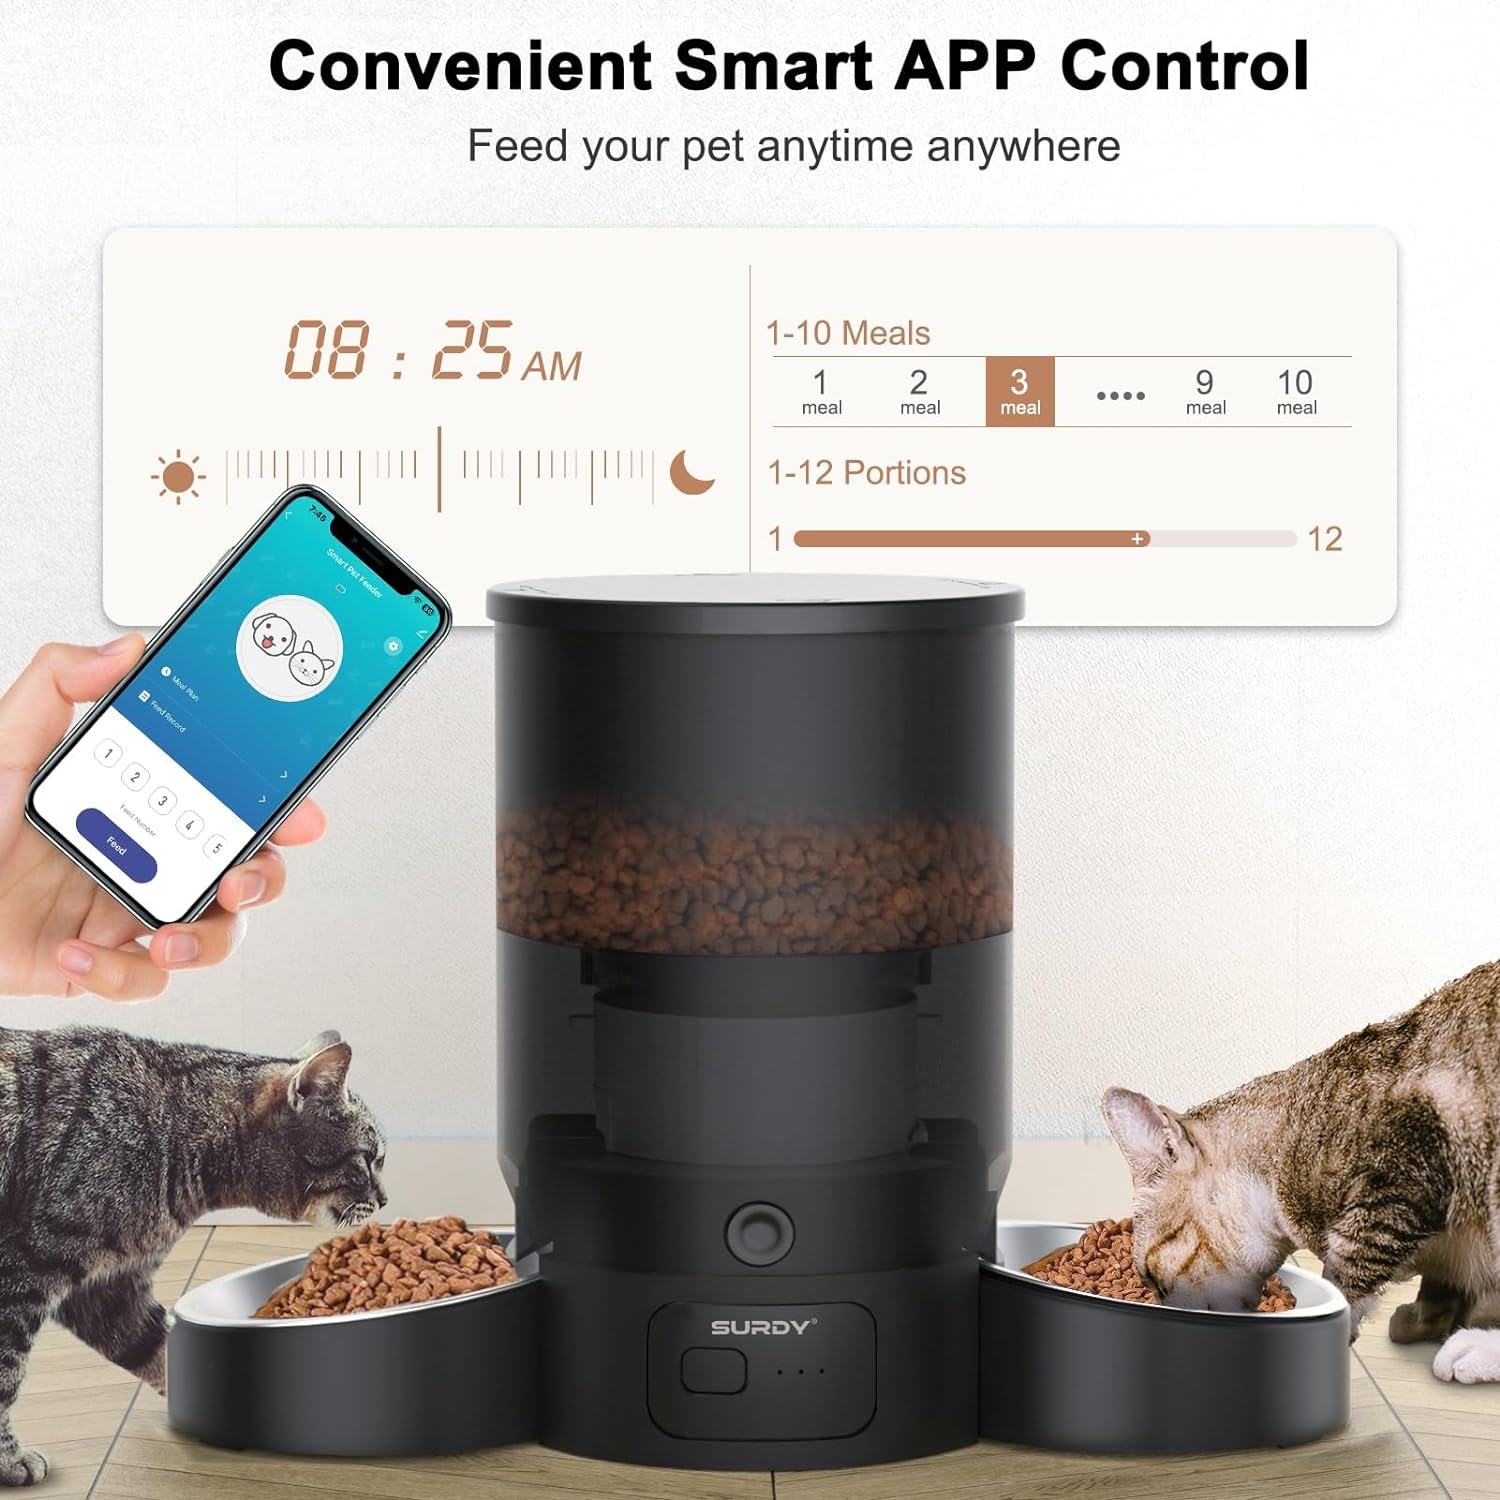 Automatic Cat Food Dispenser, SURDY 2.4G WiFi Pet Feeder with APP Control for Remote Feeding, 3L Automatic Cat Feeder for Two Cats, Dogs  Small Pets 1-10 Meals, Dual Power Supply, 10s Meal Call